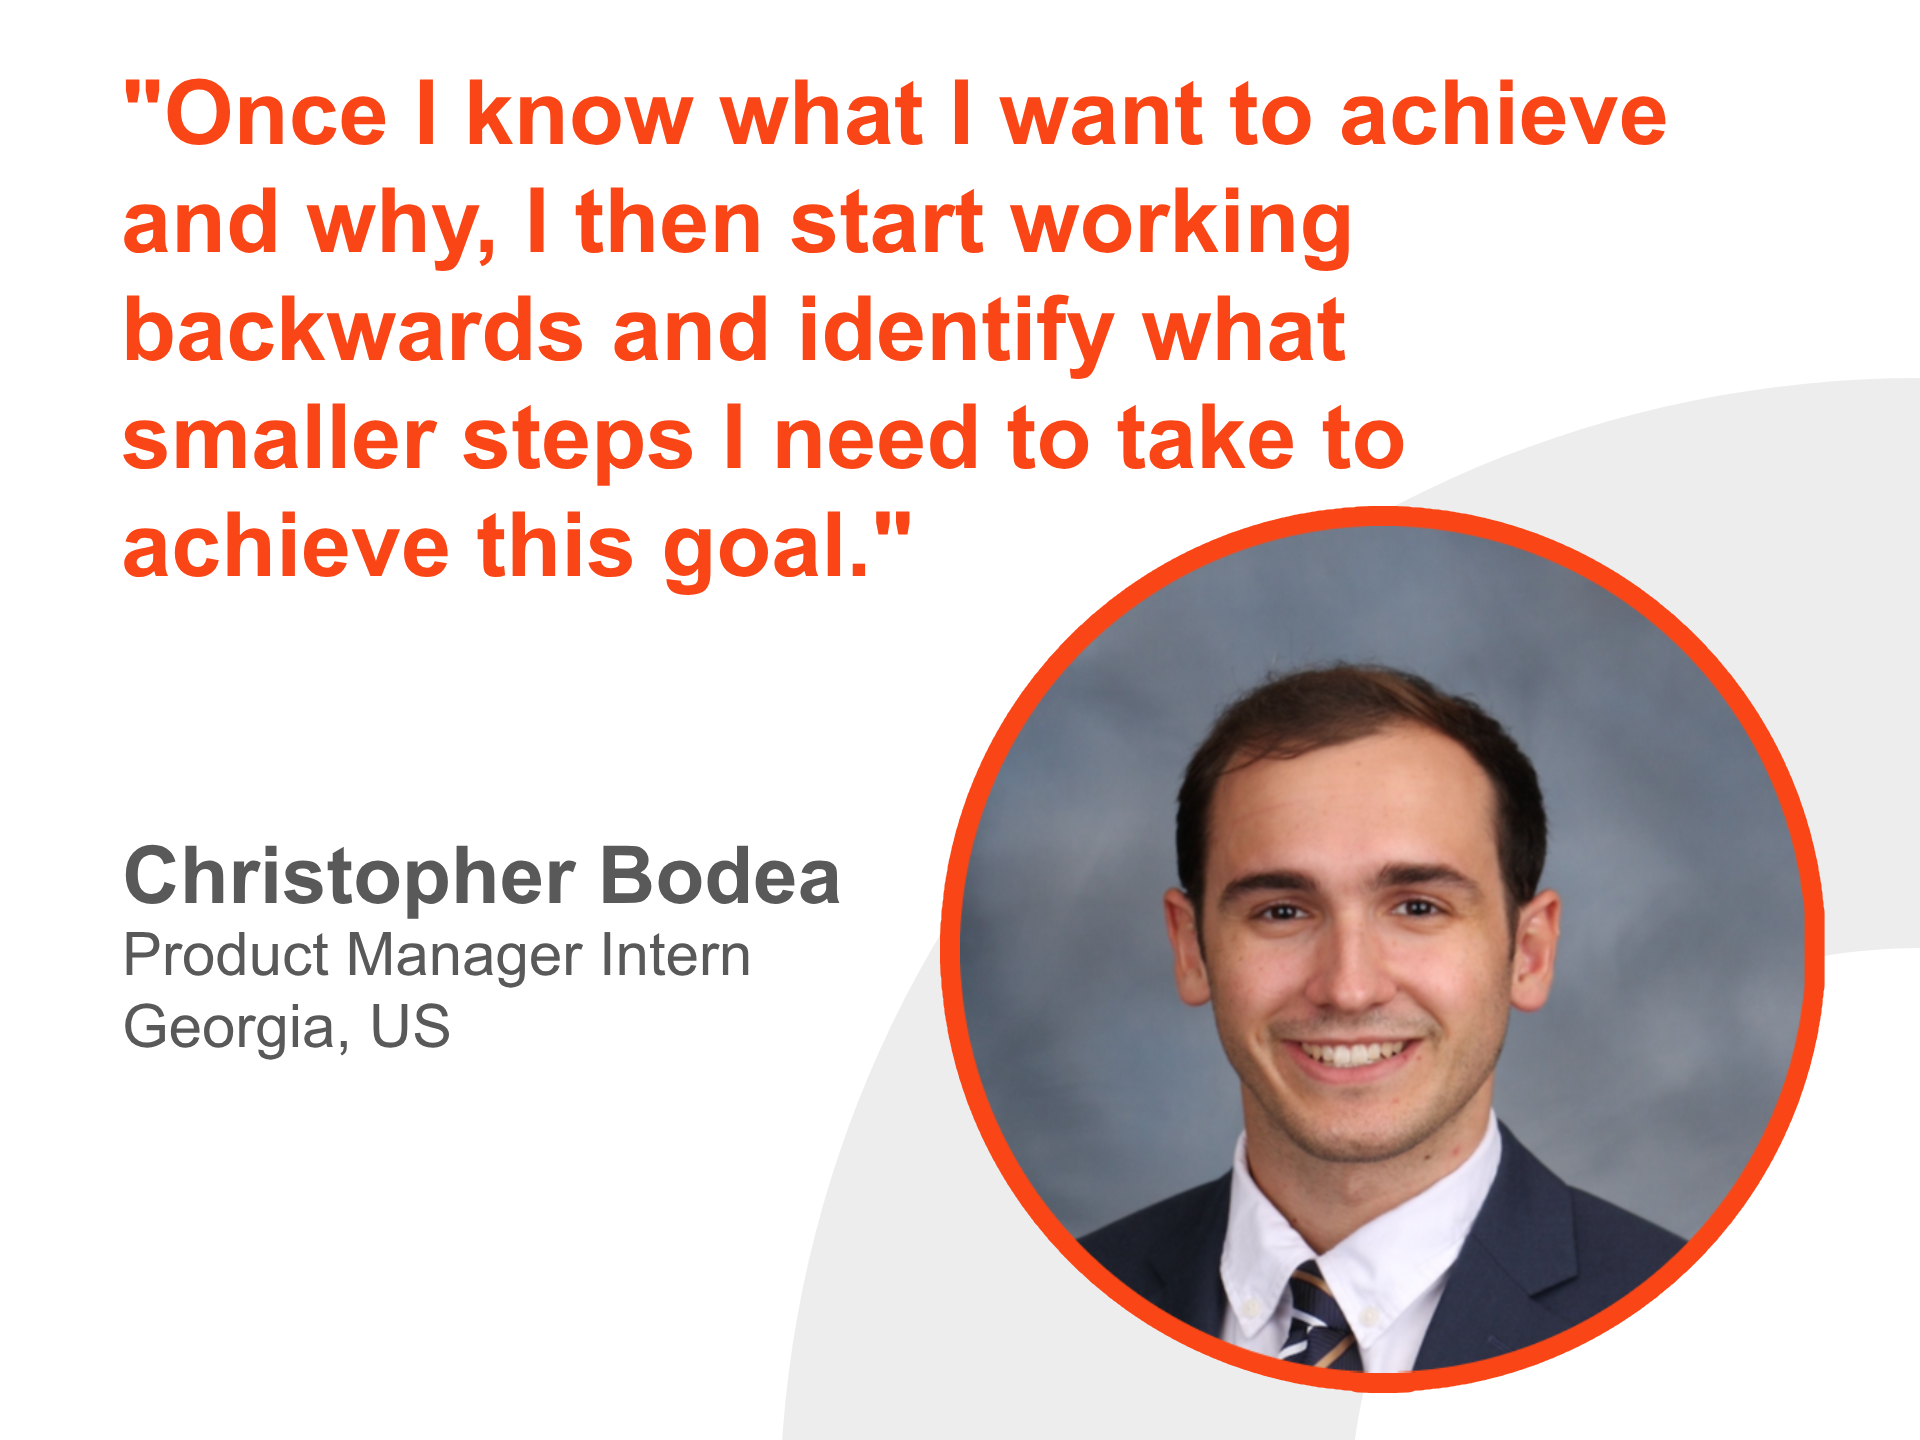 A picture containing Christopher Bodea's headshot and one of his quotes